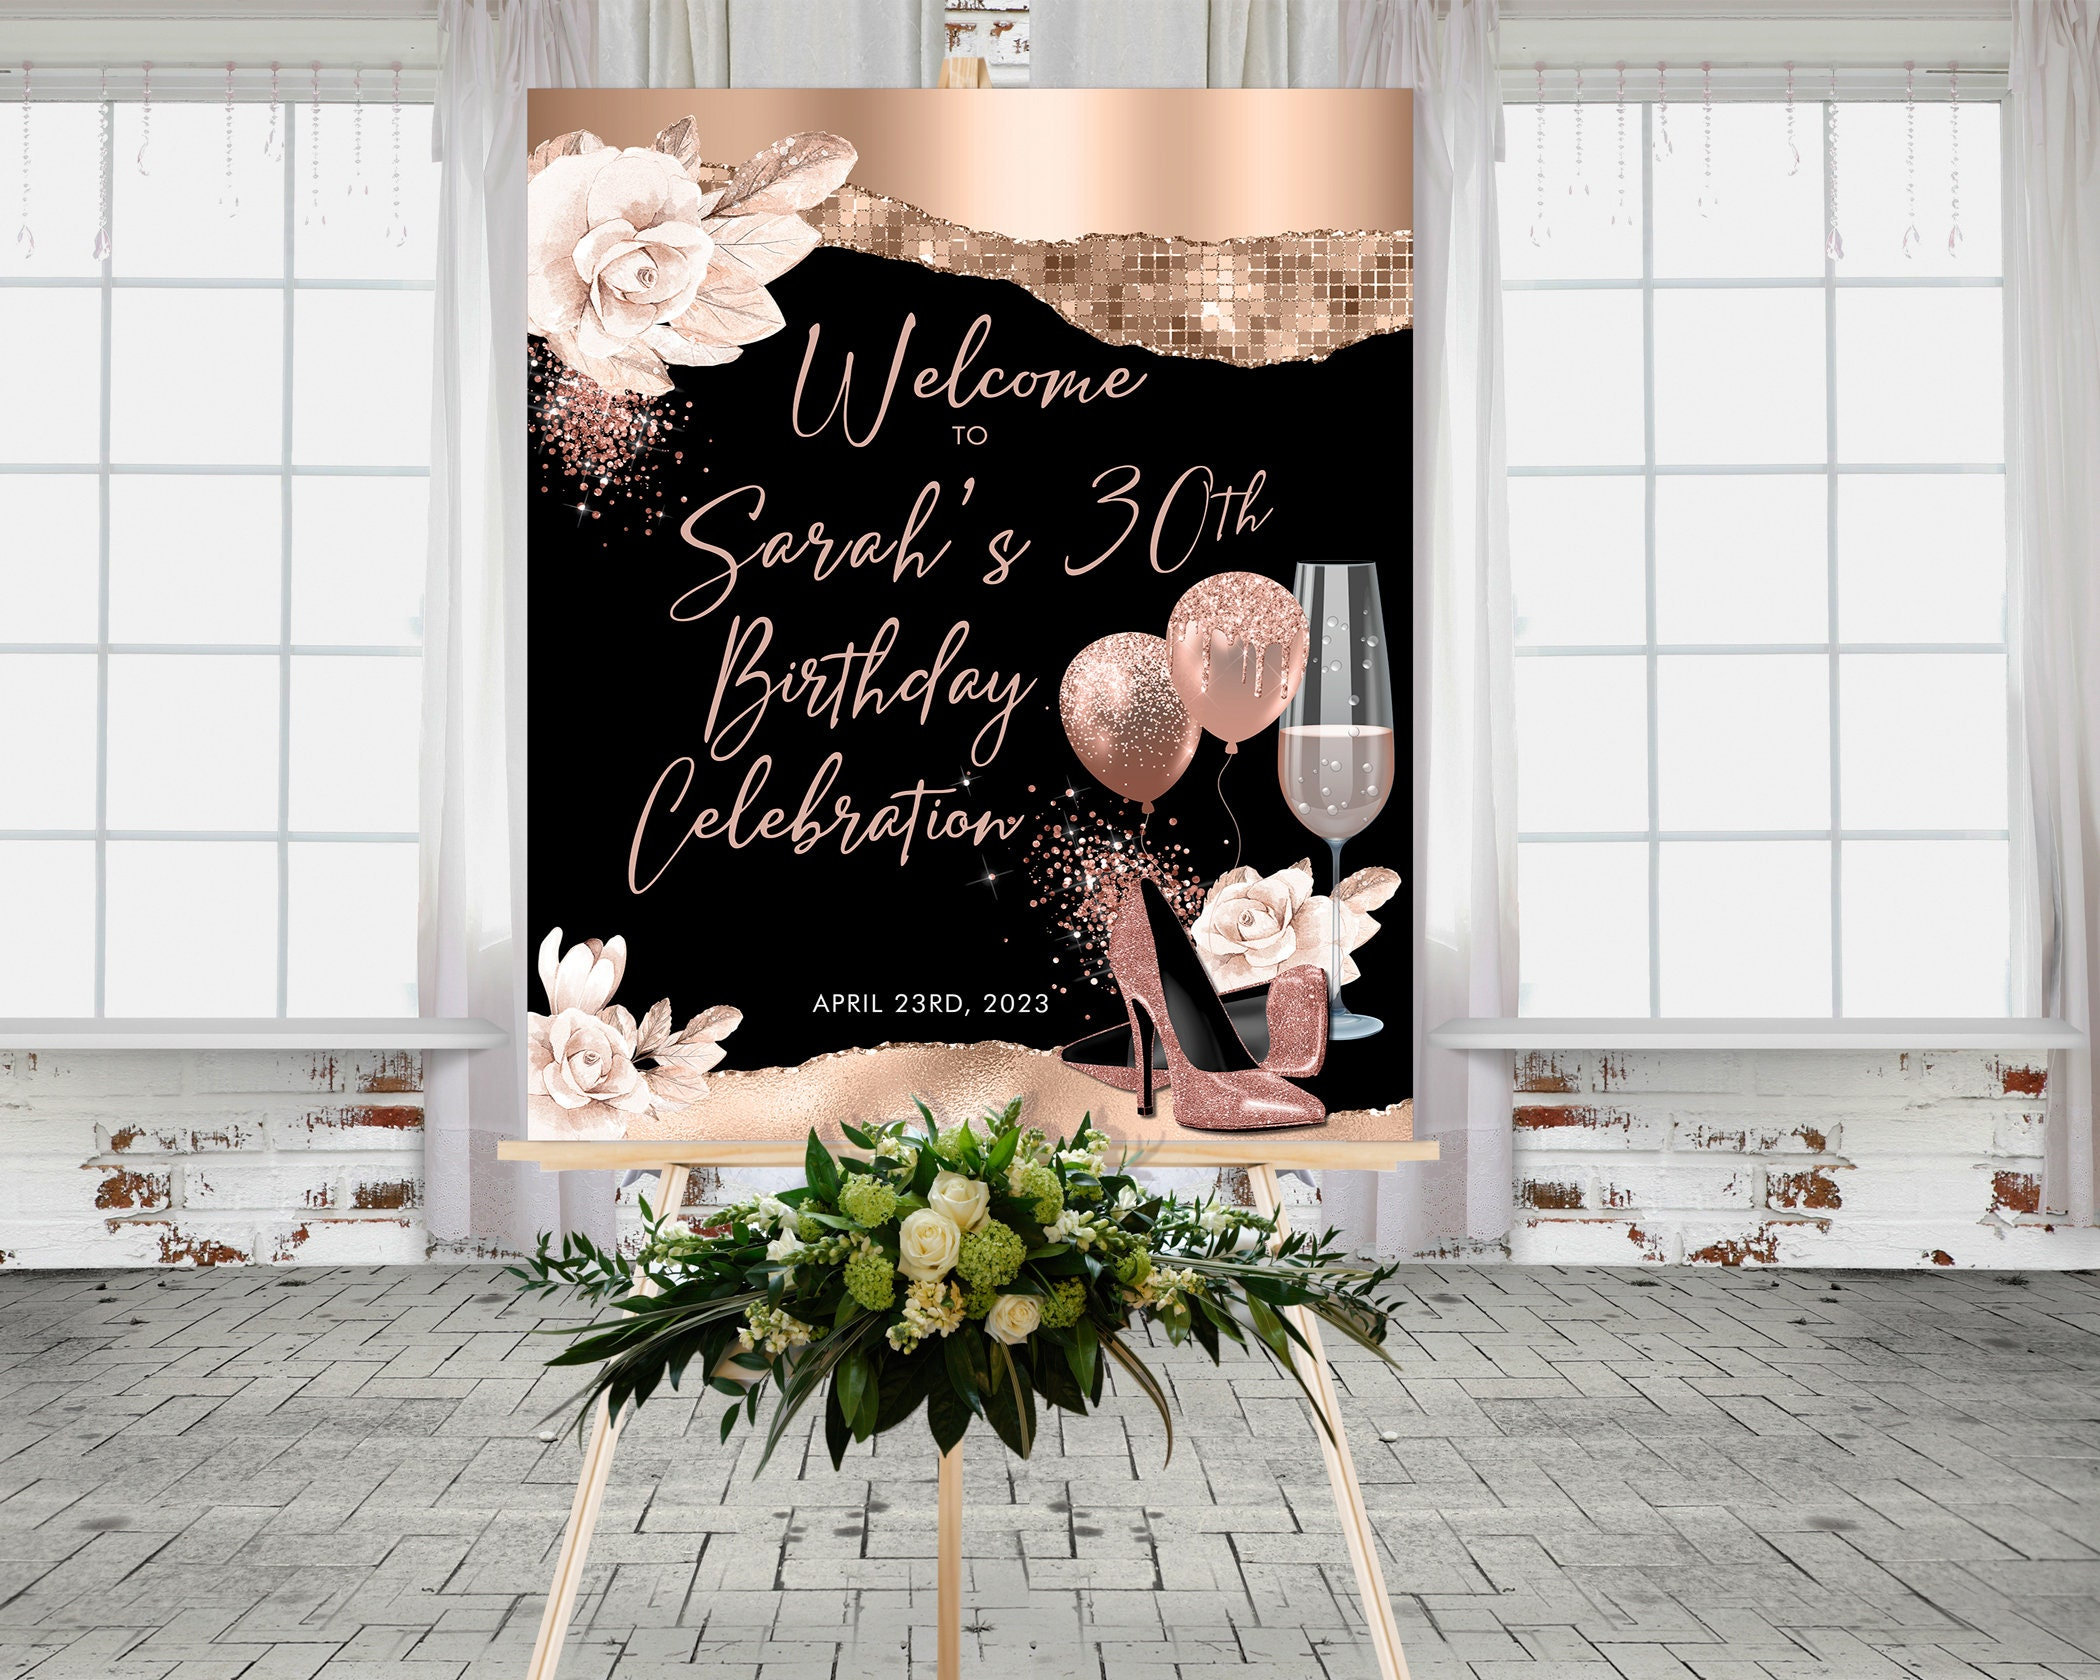 Black and Gold Party Decorations: An Elegant Theme - Modern Mommsie